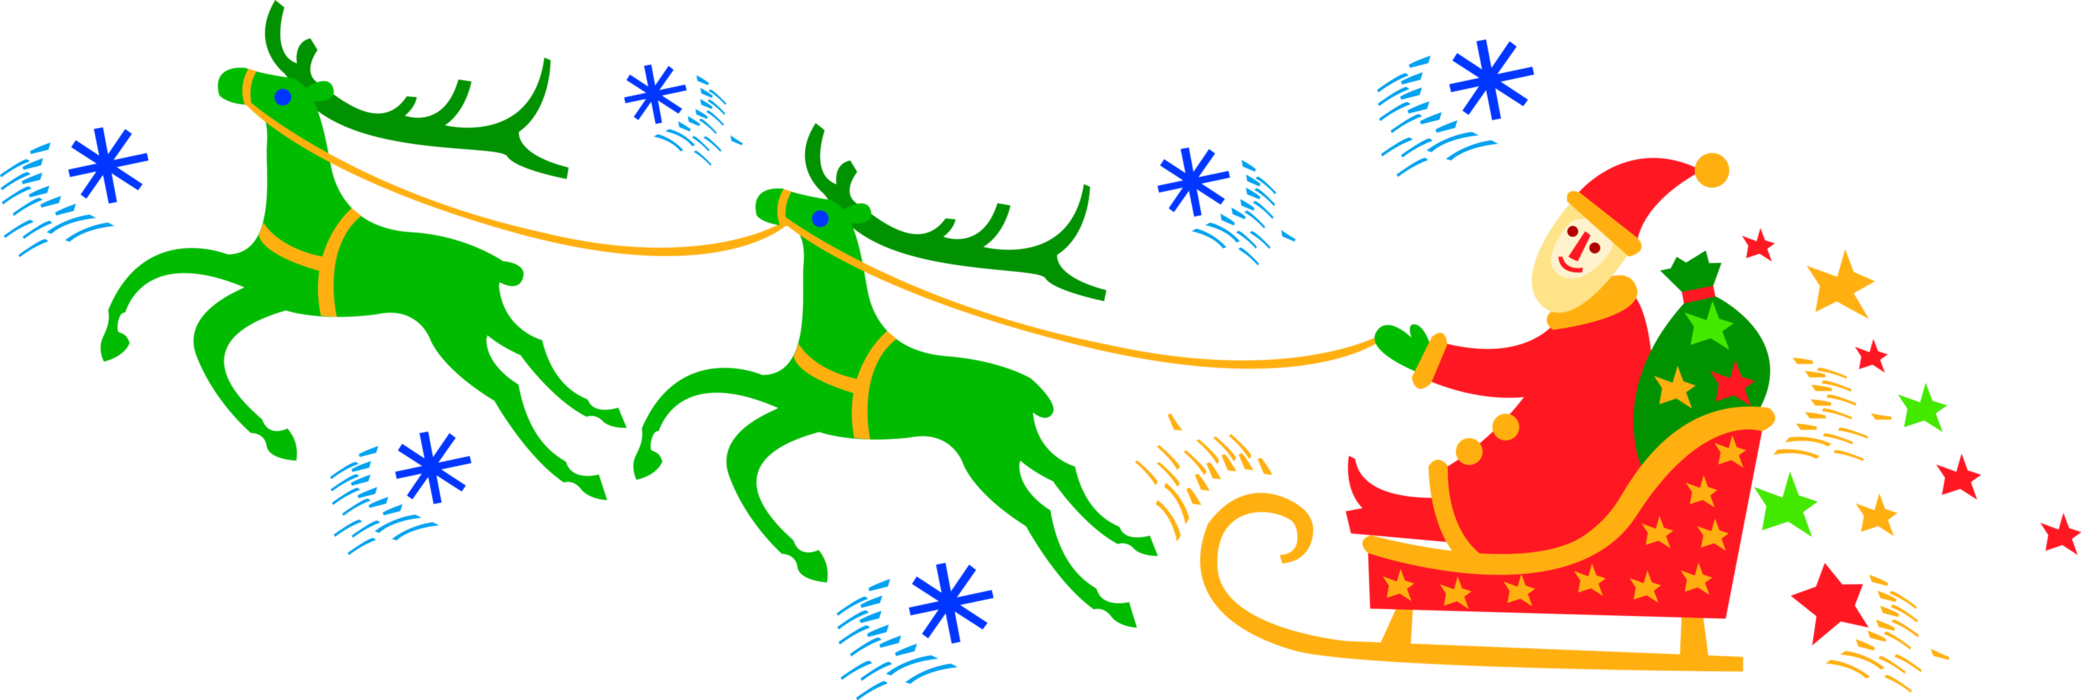 Vector Illustration of Santa Claus in Sleigh with Gifts and Green Reindeer